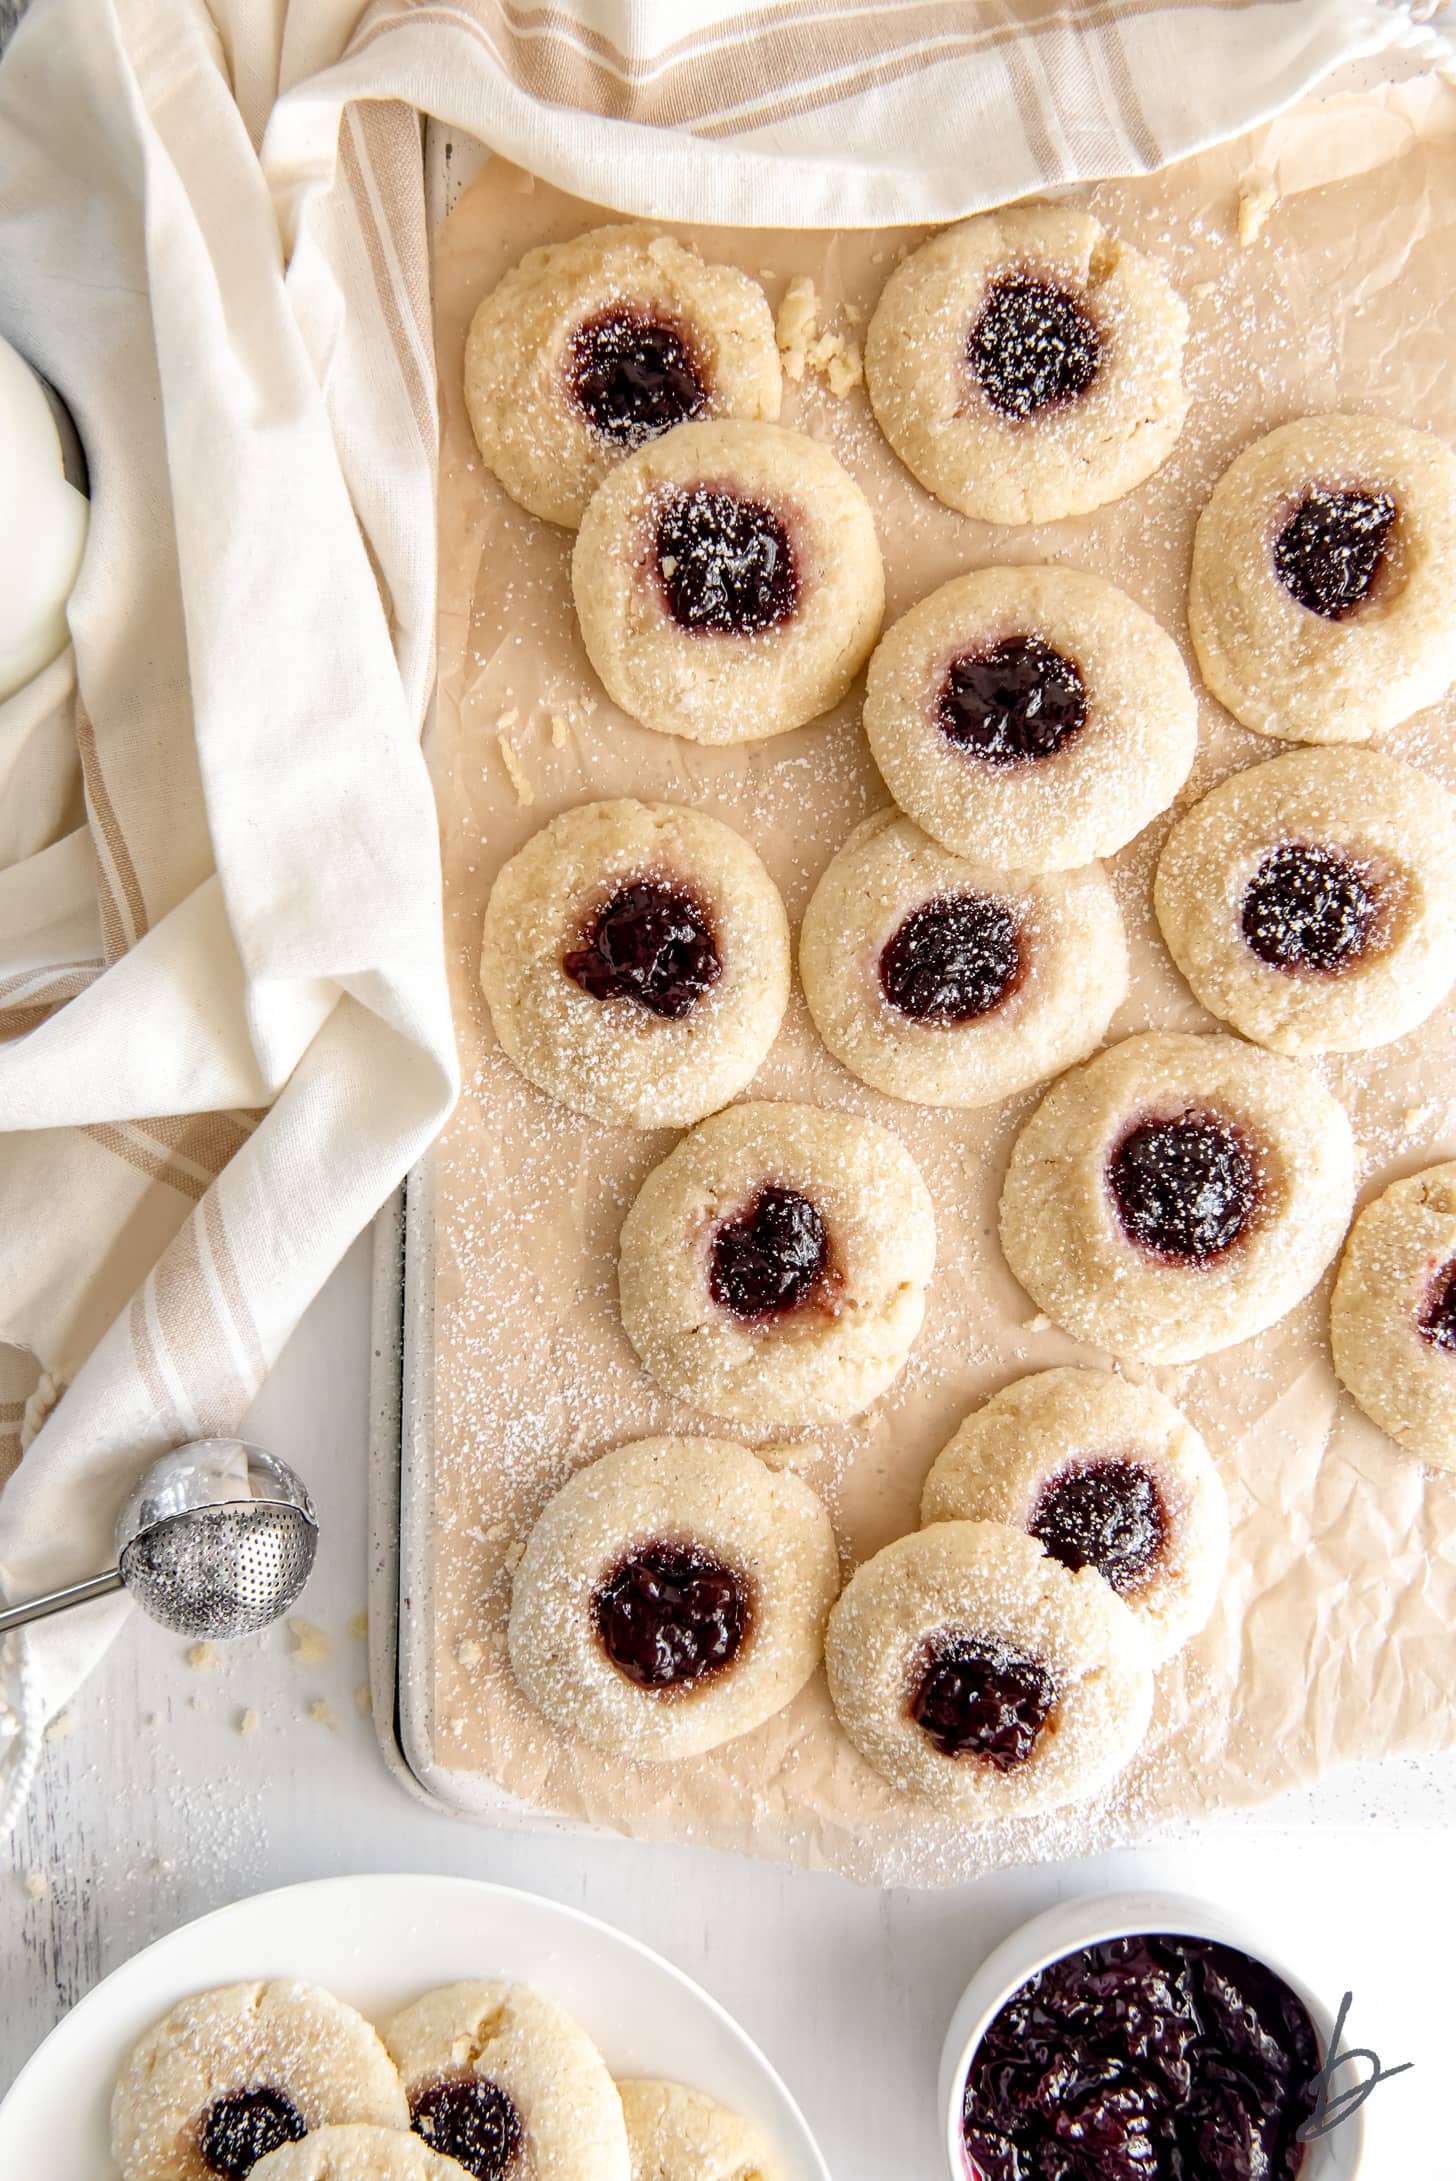 jam thumbprint cookies on parchment paper next to cream-colored kitchen cloth